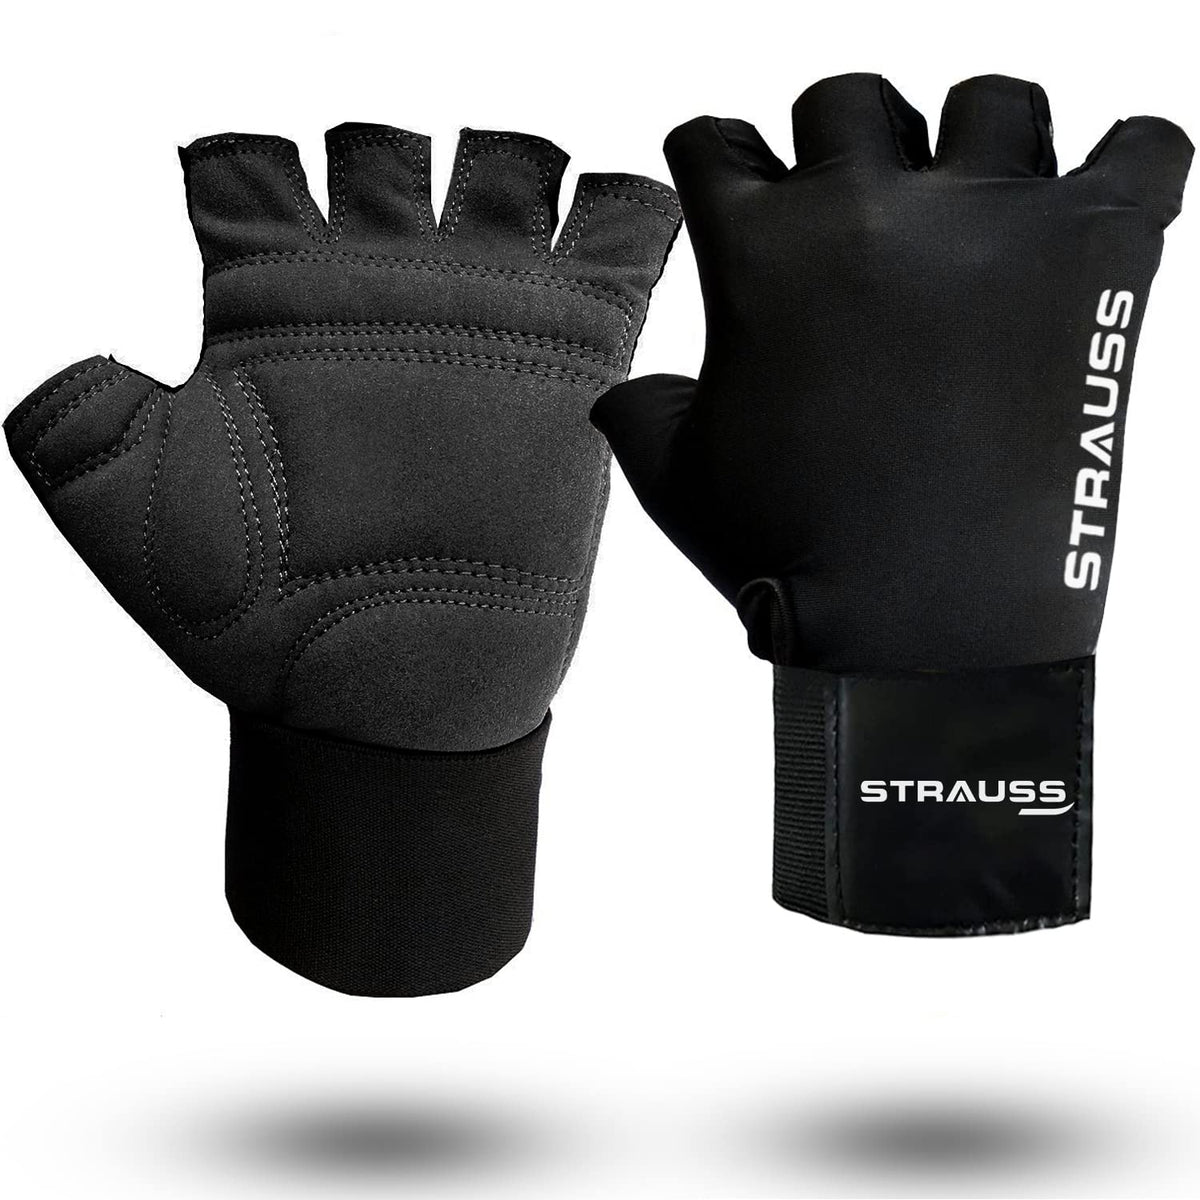 STRAUSS Suede Gym Gloves for Weightlifting, Training, Cycling, Exercise & Gym | Half Finger Design, 8mm Foam Cushioning, Anti-Slip & Breathable Lycra Material, (Black), (Large)